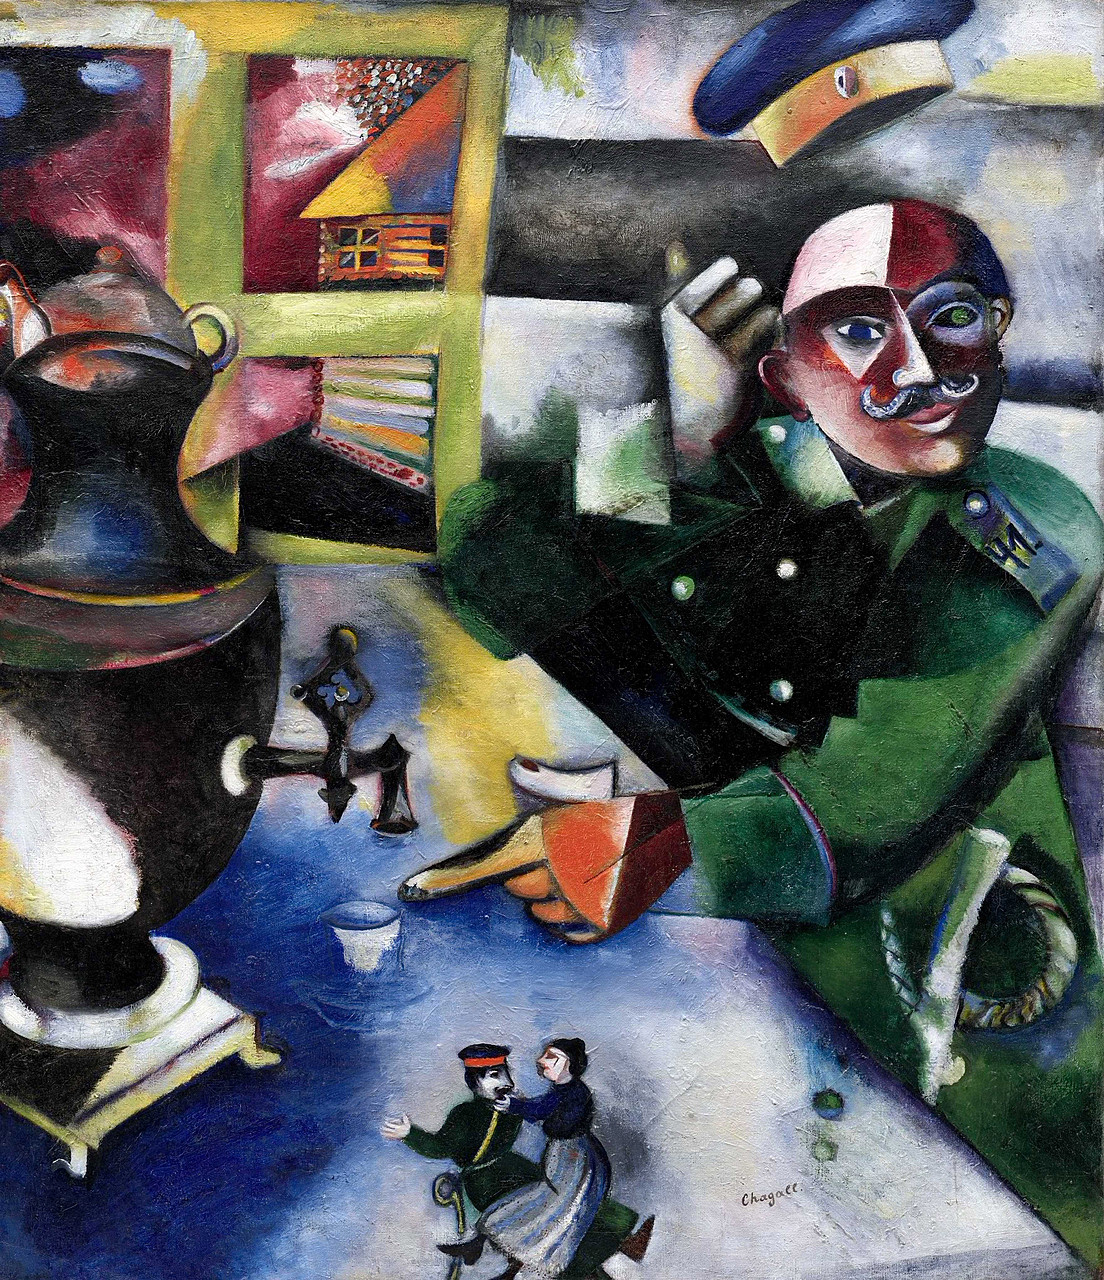 The Soldier Drinks | The Guggenheim Museums and Foundation